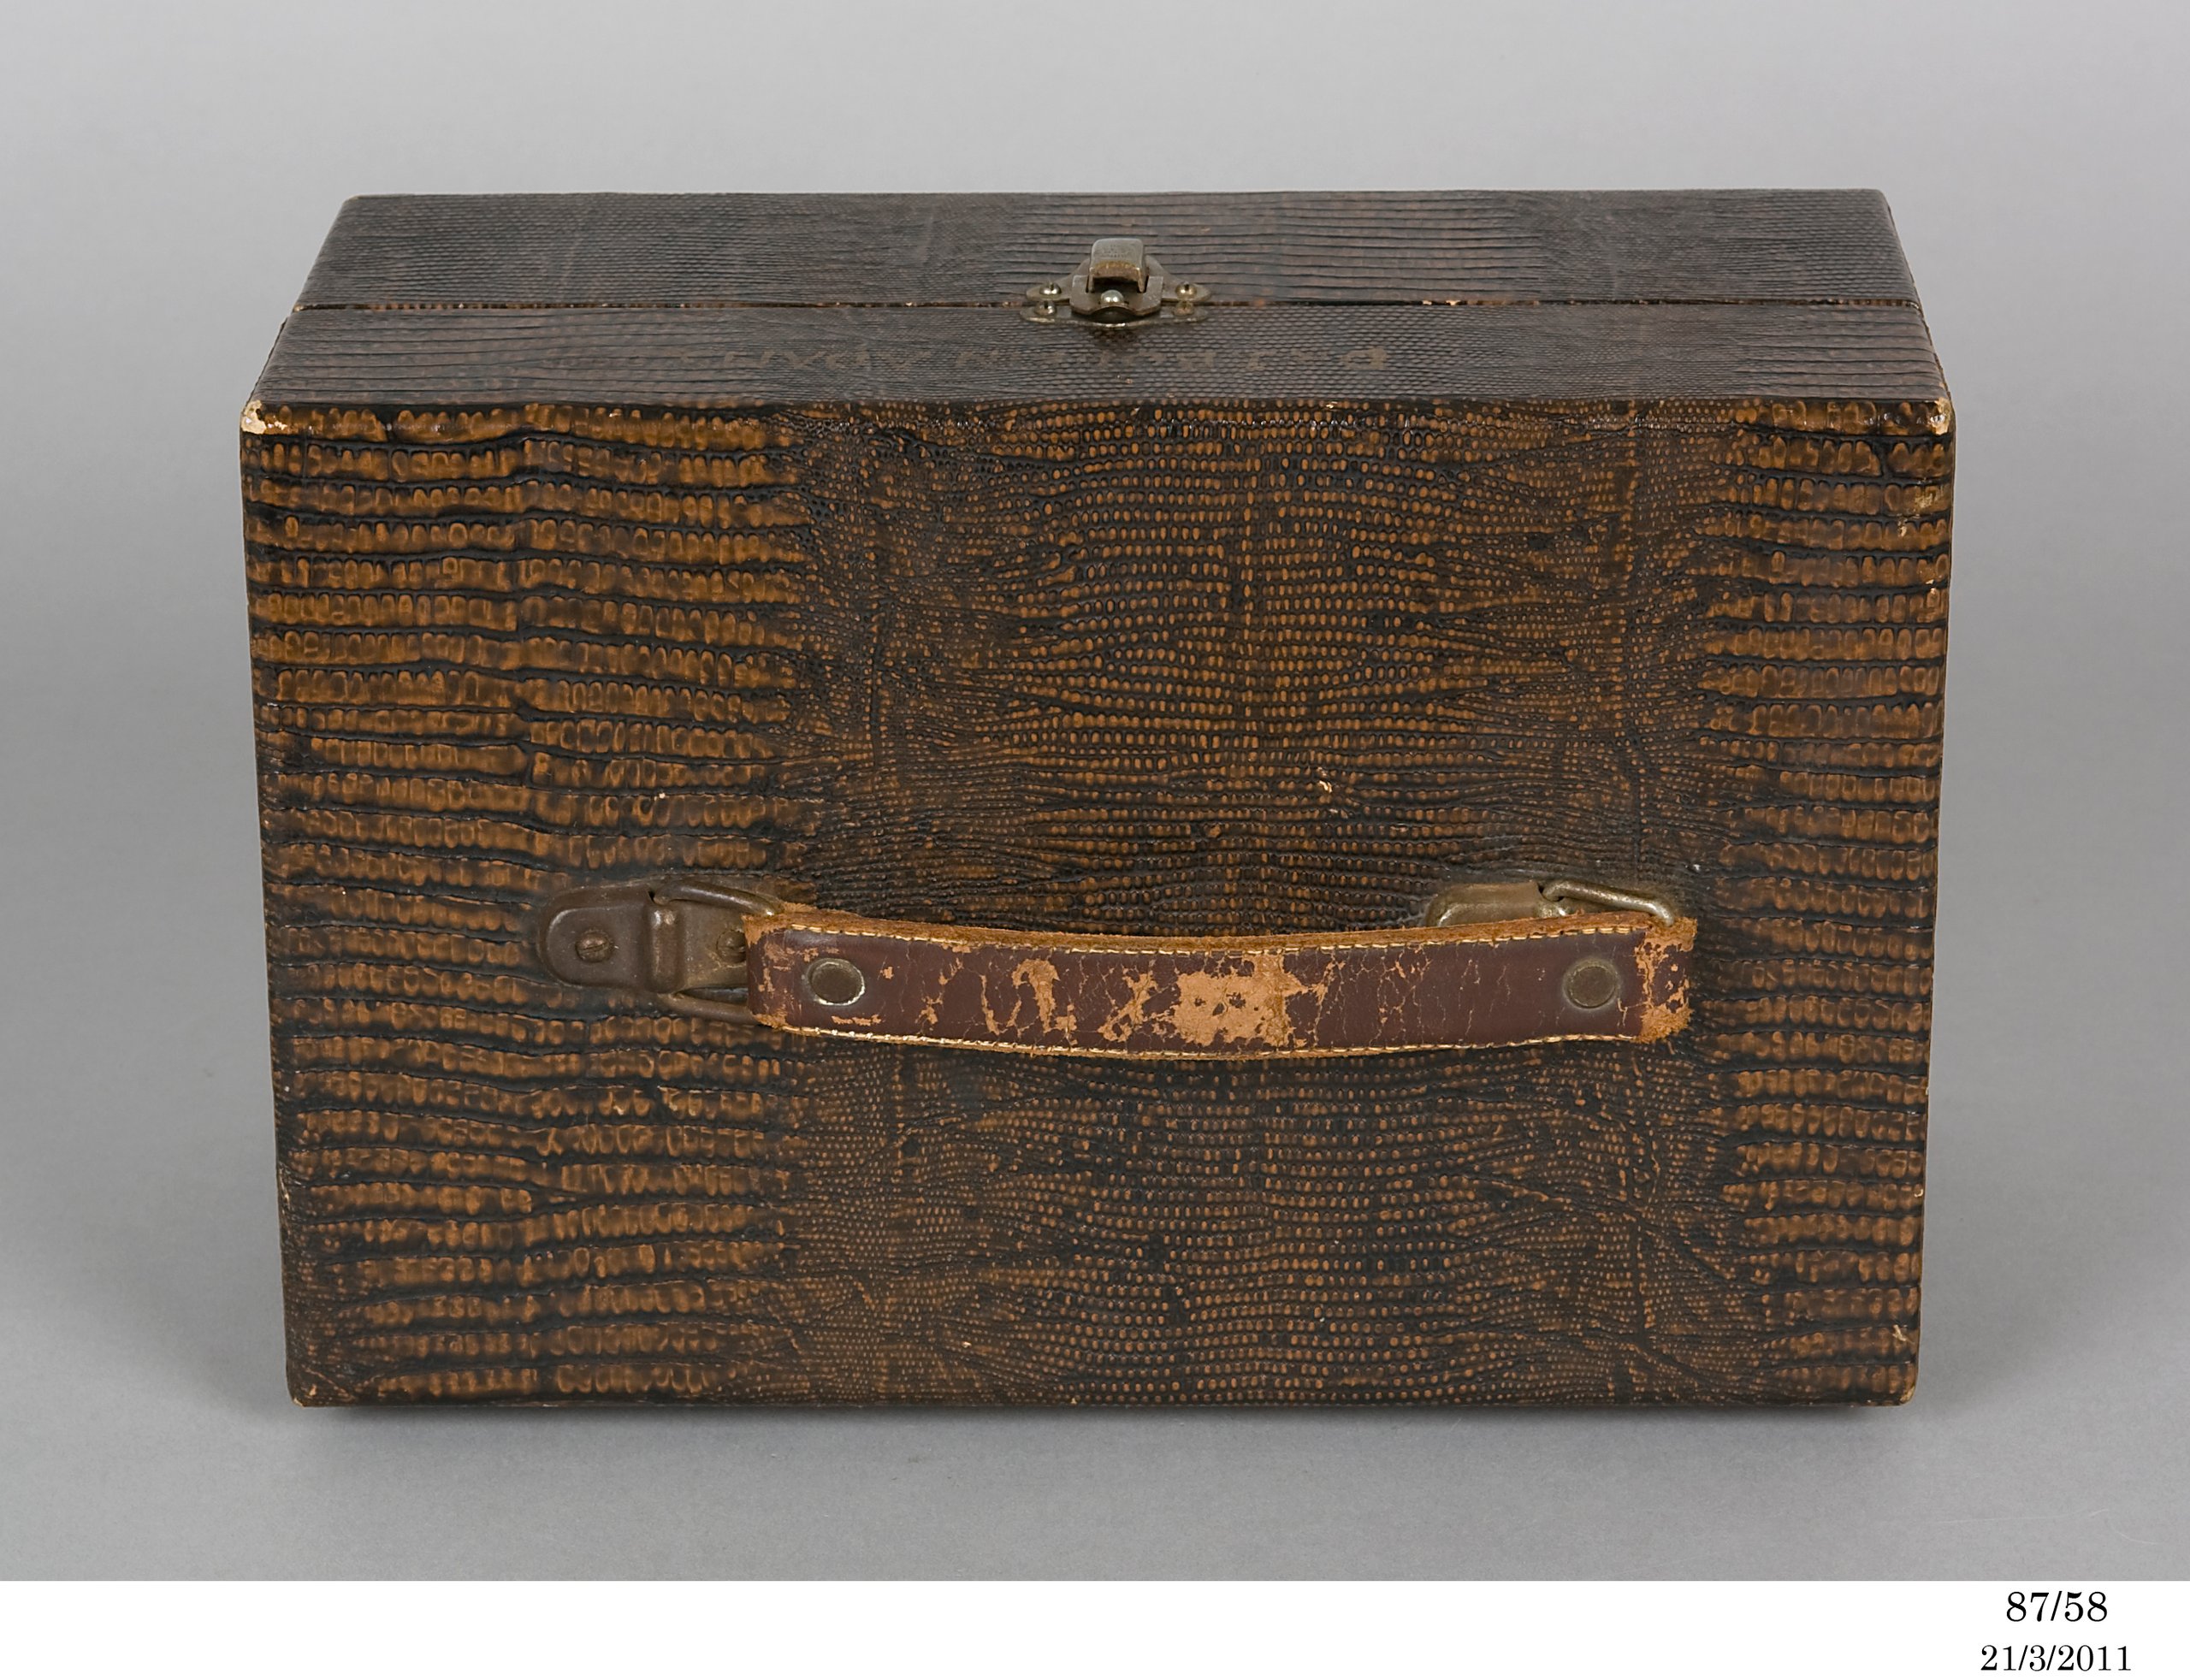 Case containing electrotherapeutic device believed to have belonged to the infamous Dr John Bodkin Adams who was a British general practitioner in the 1900s and had numerous patients die under suspicious circumstances.